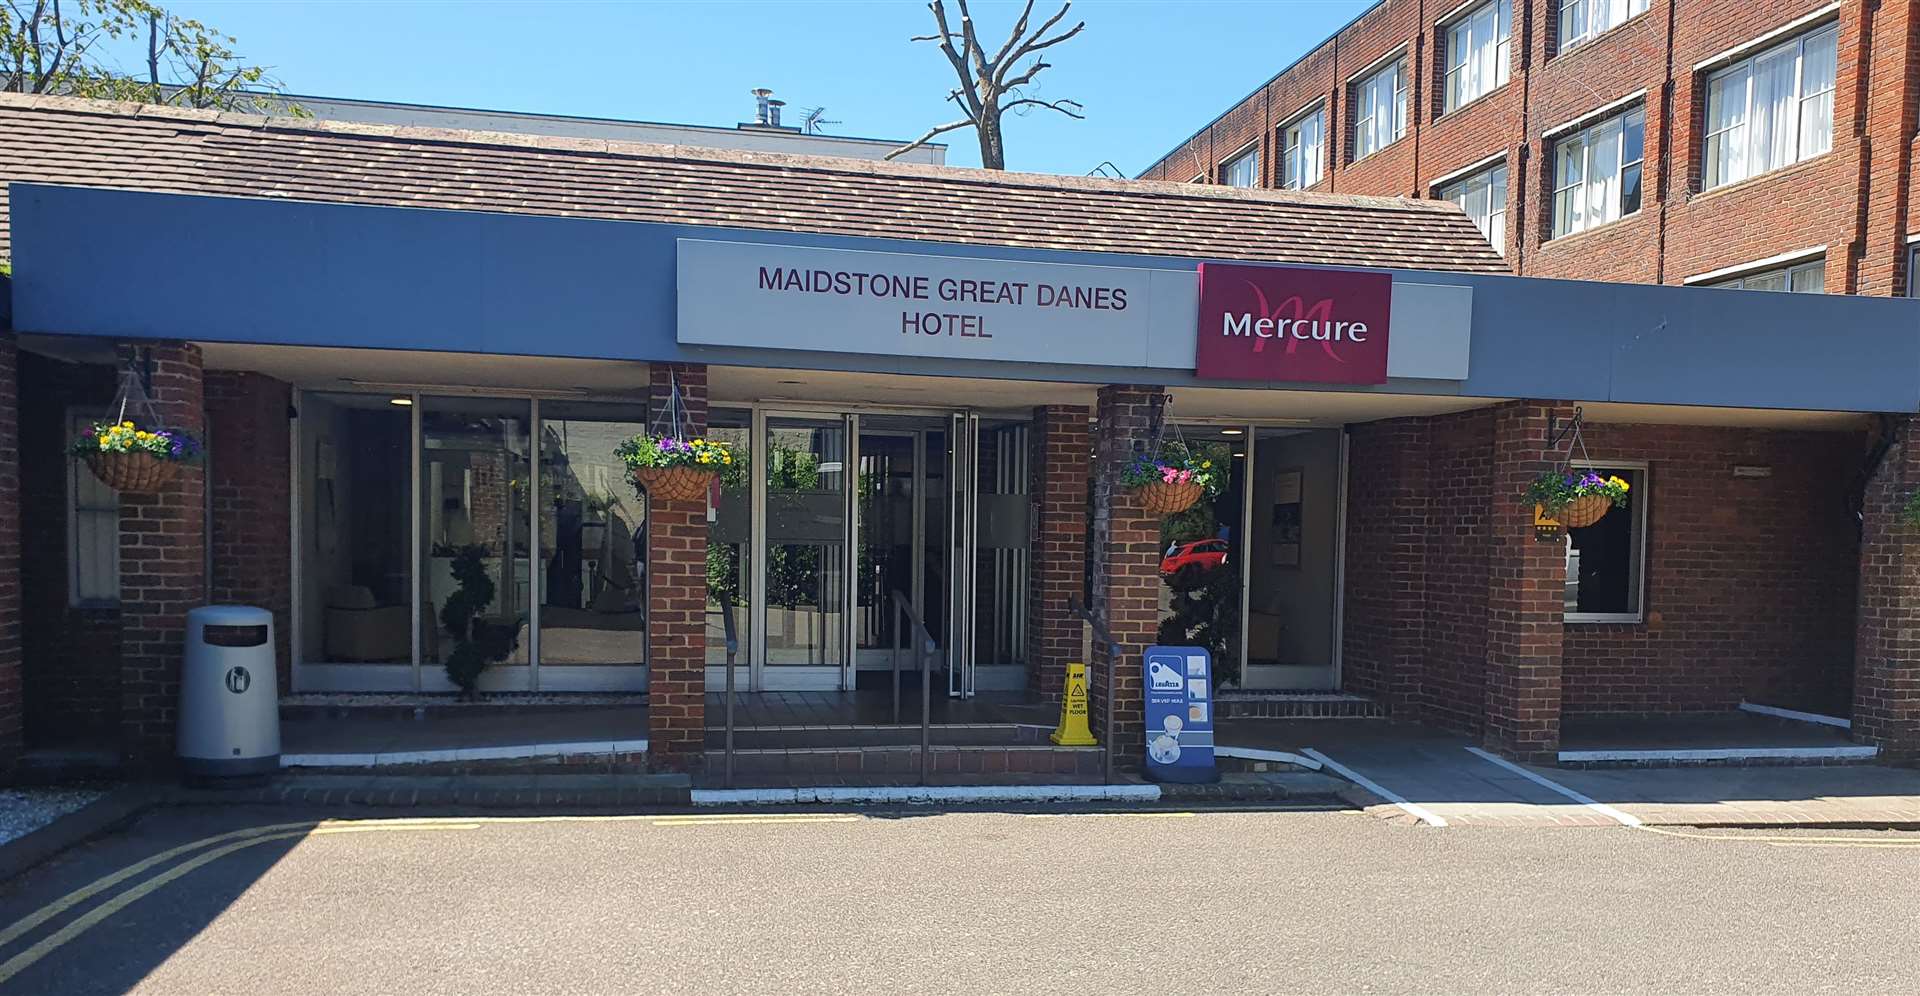 The Mercure Maidstone Great Danes Hotel is now doubling up as a court